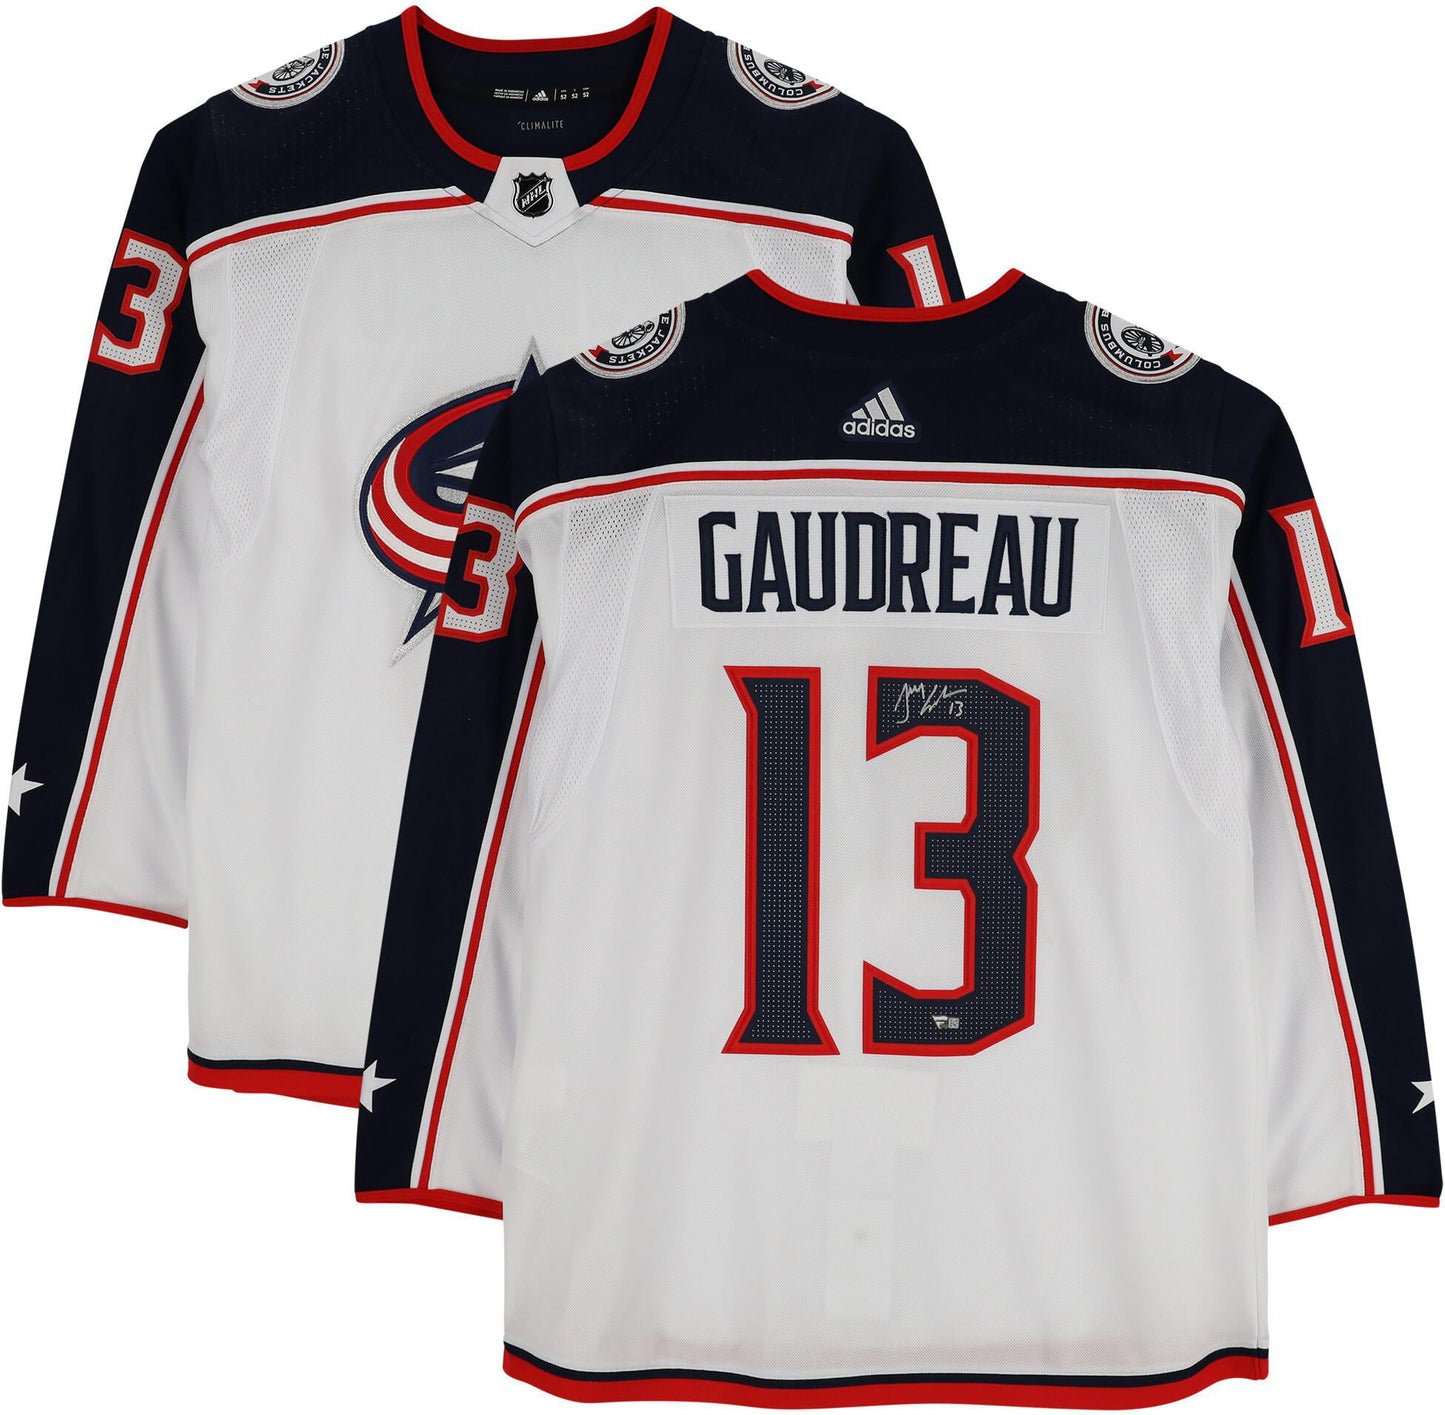 Johnny Gaudreau Columbus Blue Jackets Autographed White Adidas Authentic Jersey - Fanatics Authentic Certified